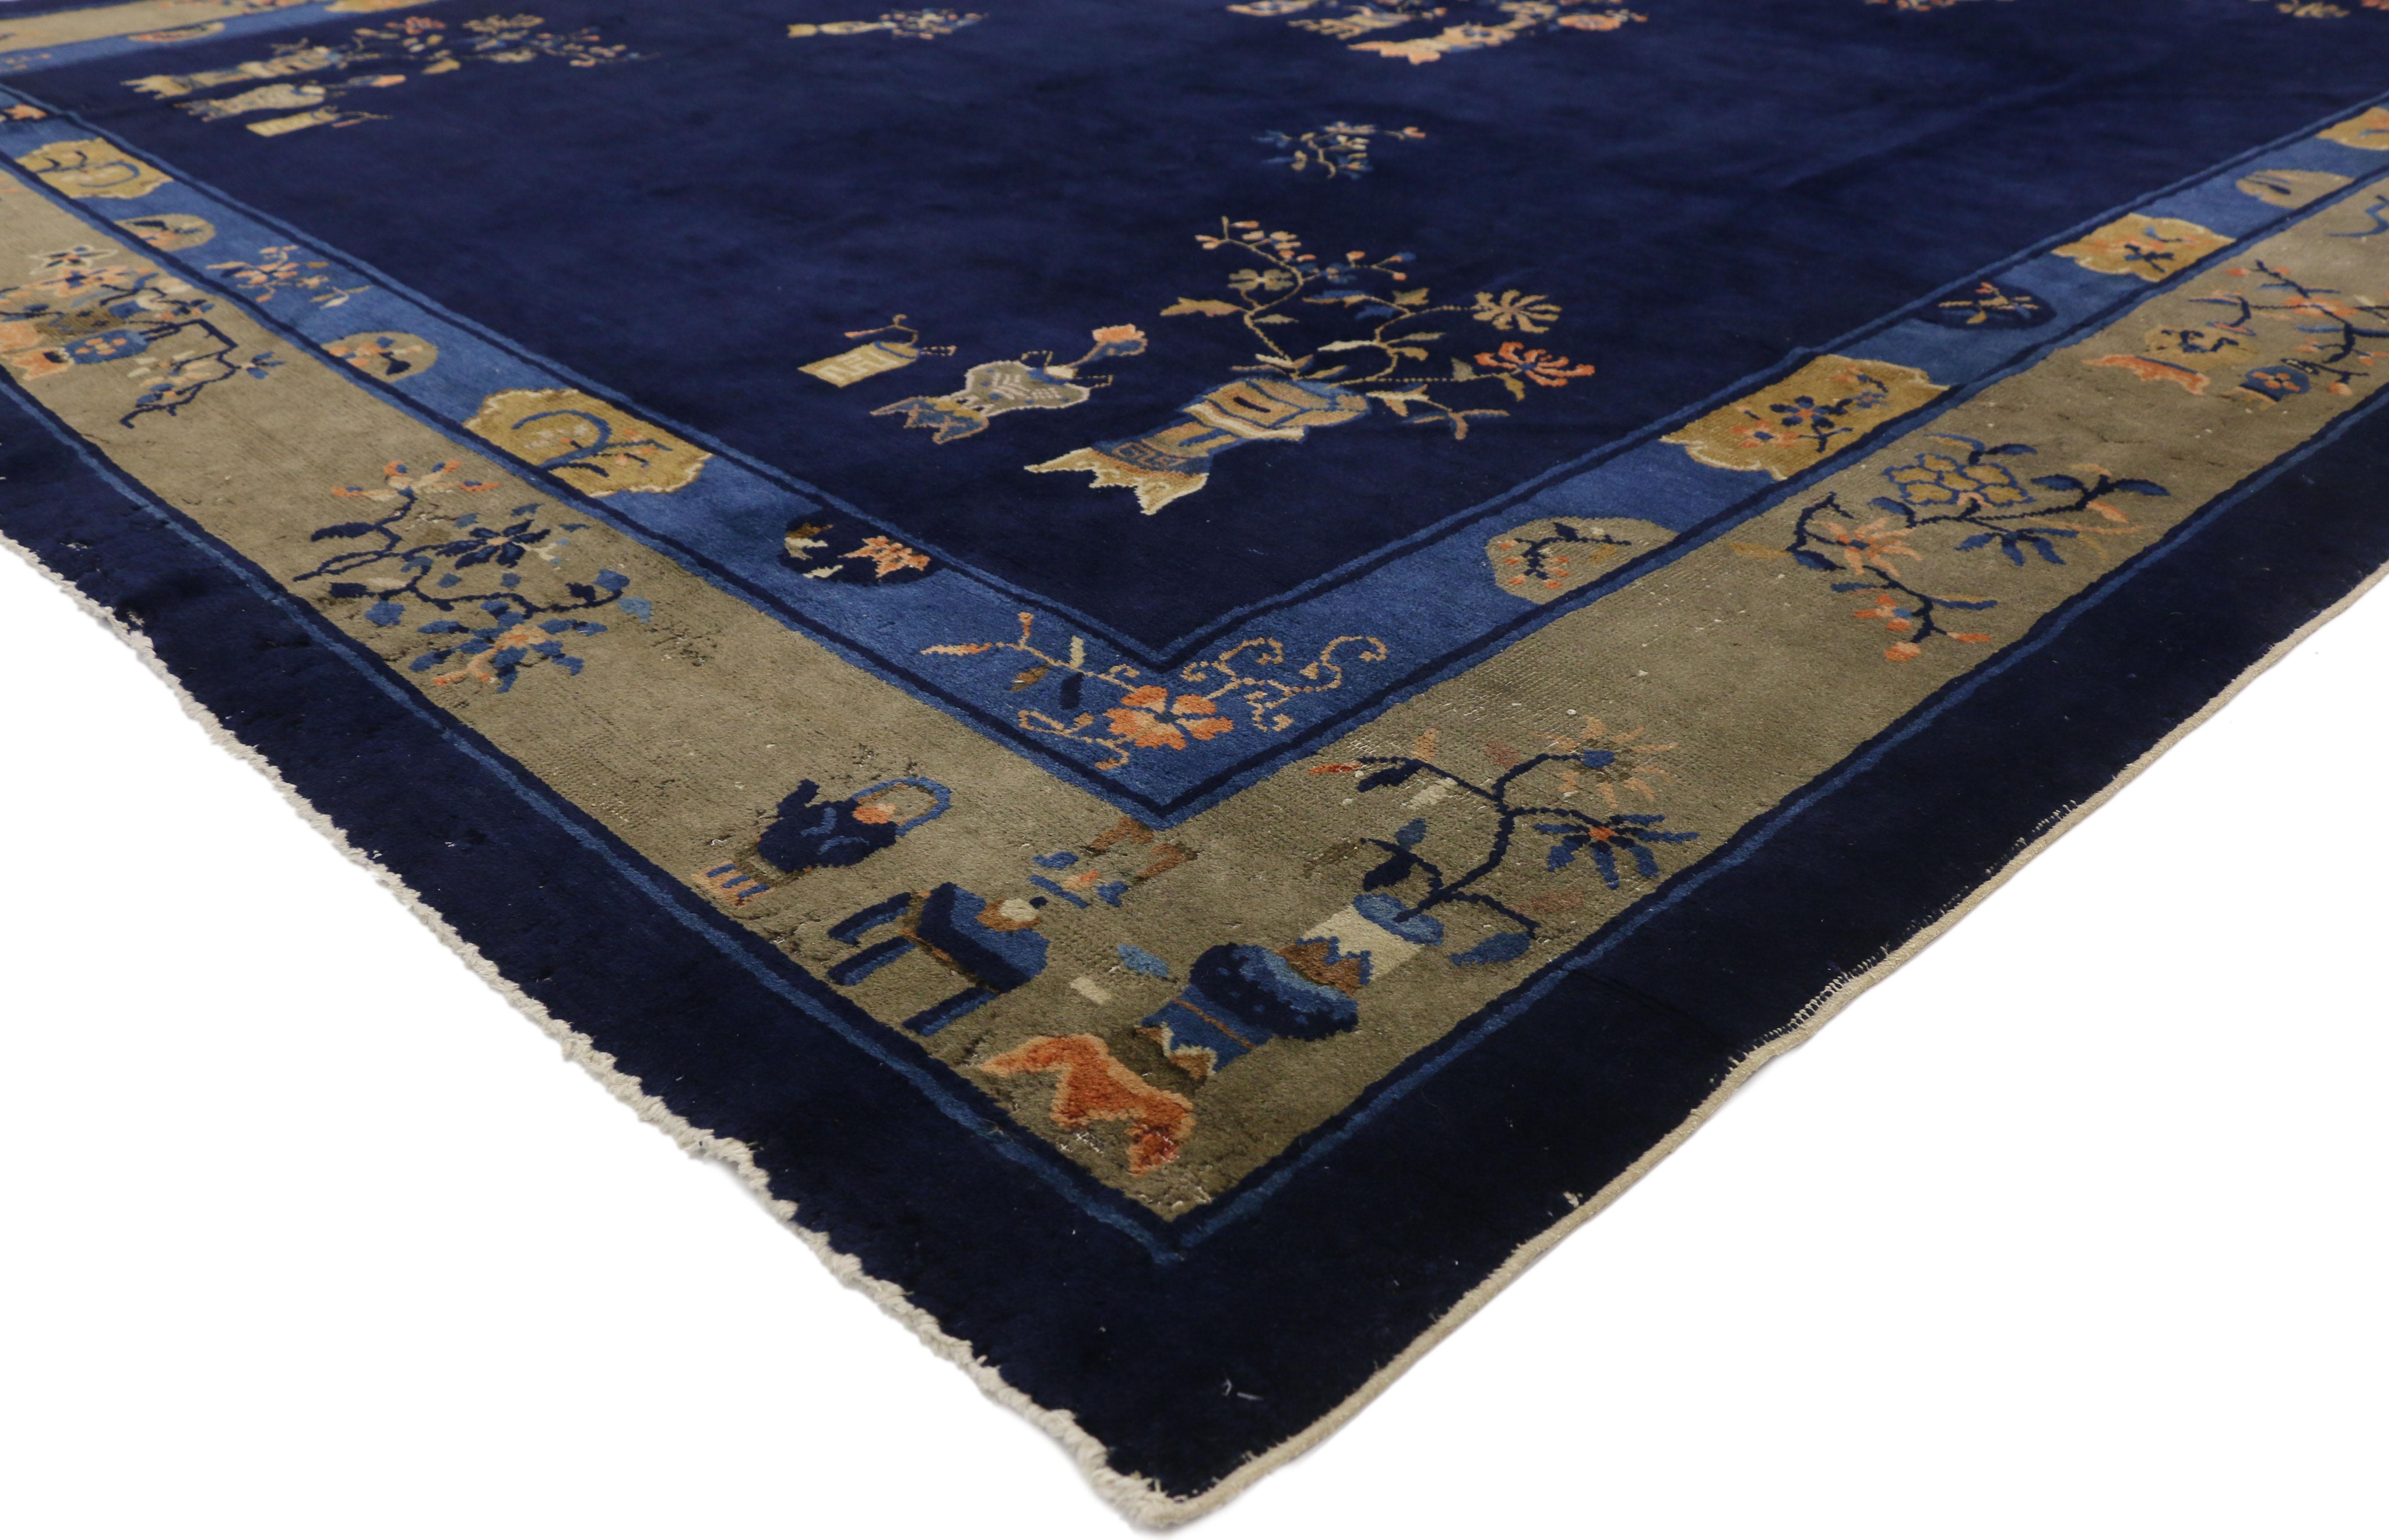 77260 Antique Chinese Peking Area rug with Traditional Chinoiserie style. This hand knotted wool antique Chinese Peking area rug features a group of three flowering cloisonne vases floating in an open abrashed indigo navy blue field. The number